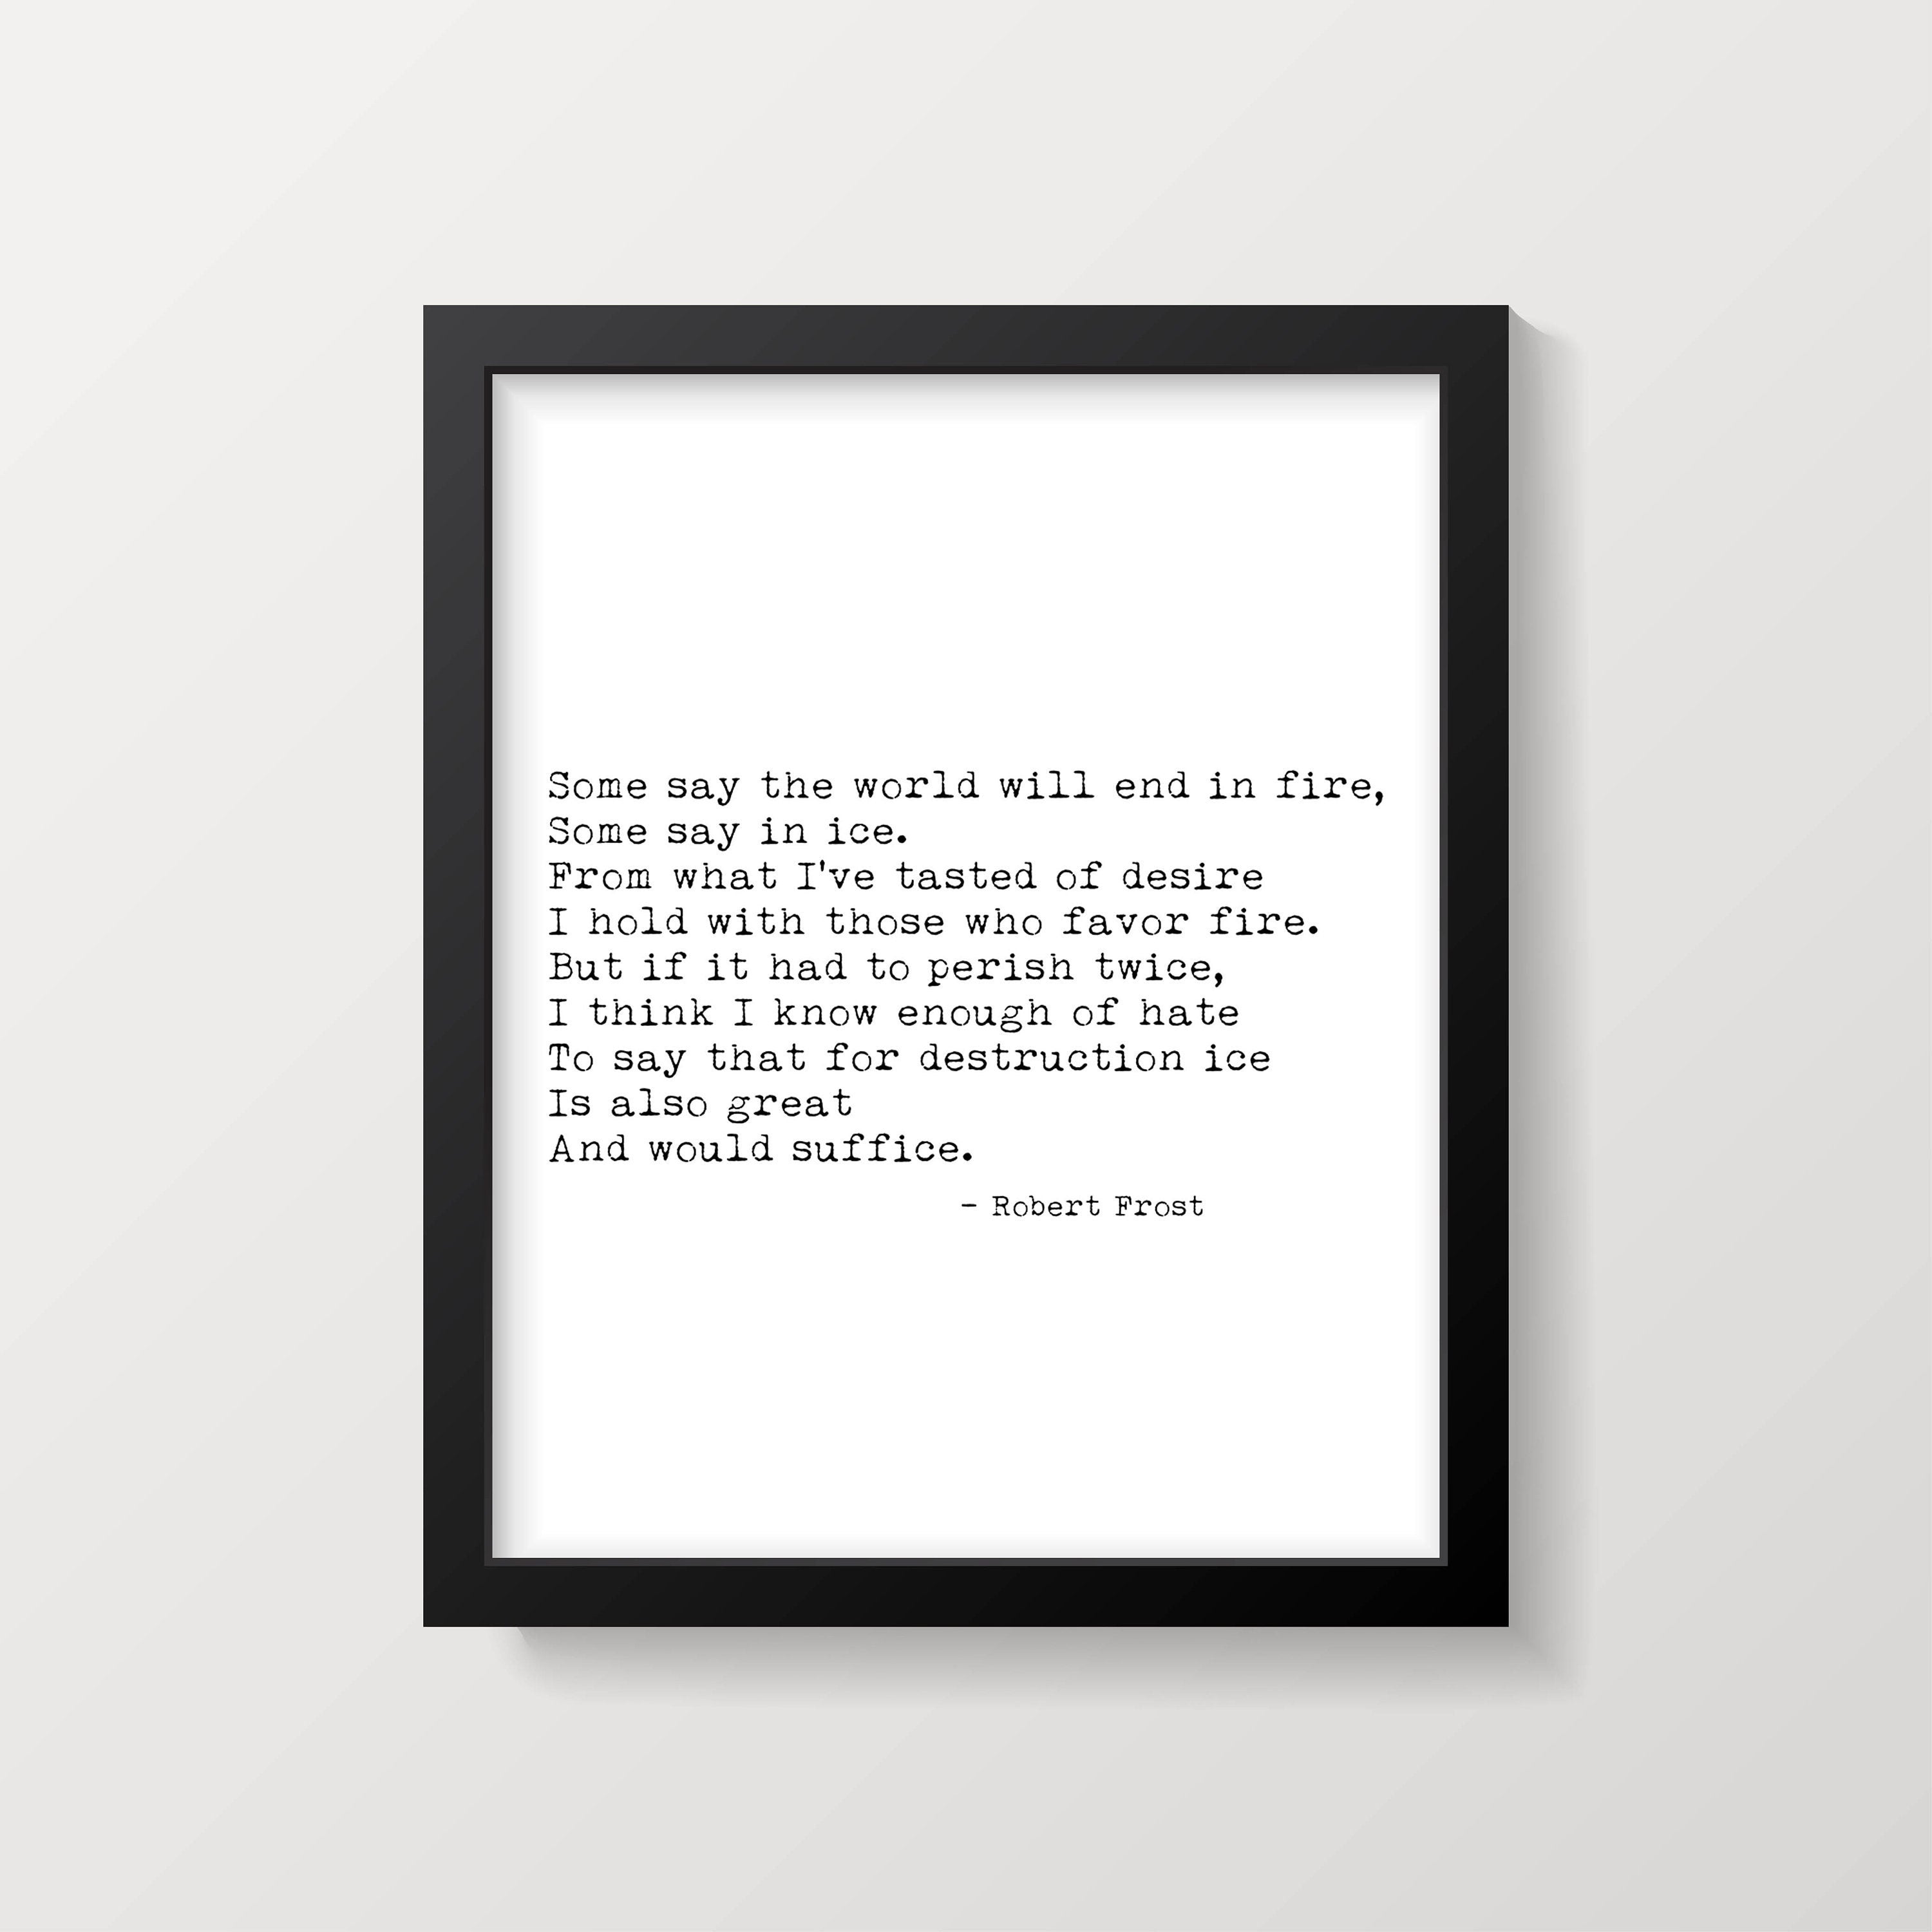 Robert Frost Poem Fire And Ice Print, Some Say The World Will End In Fire